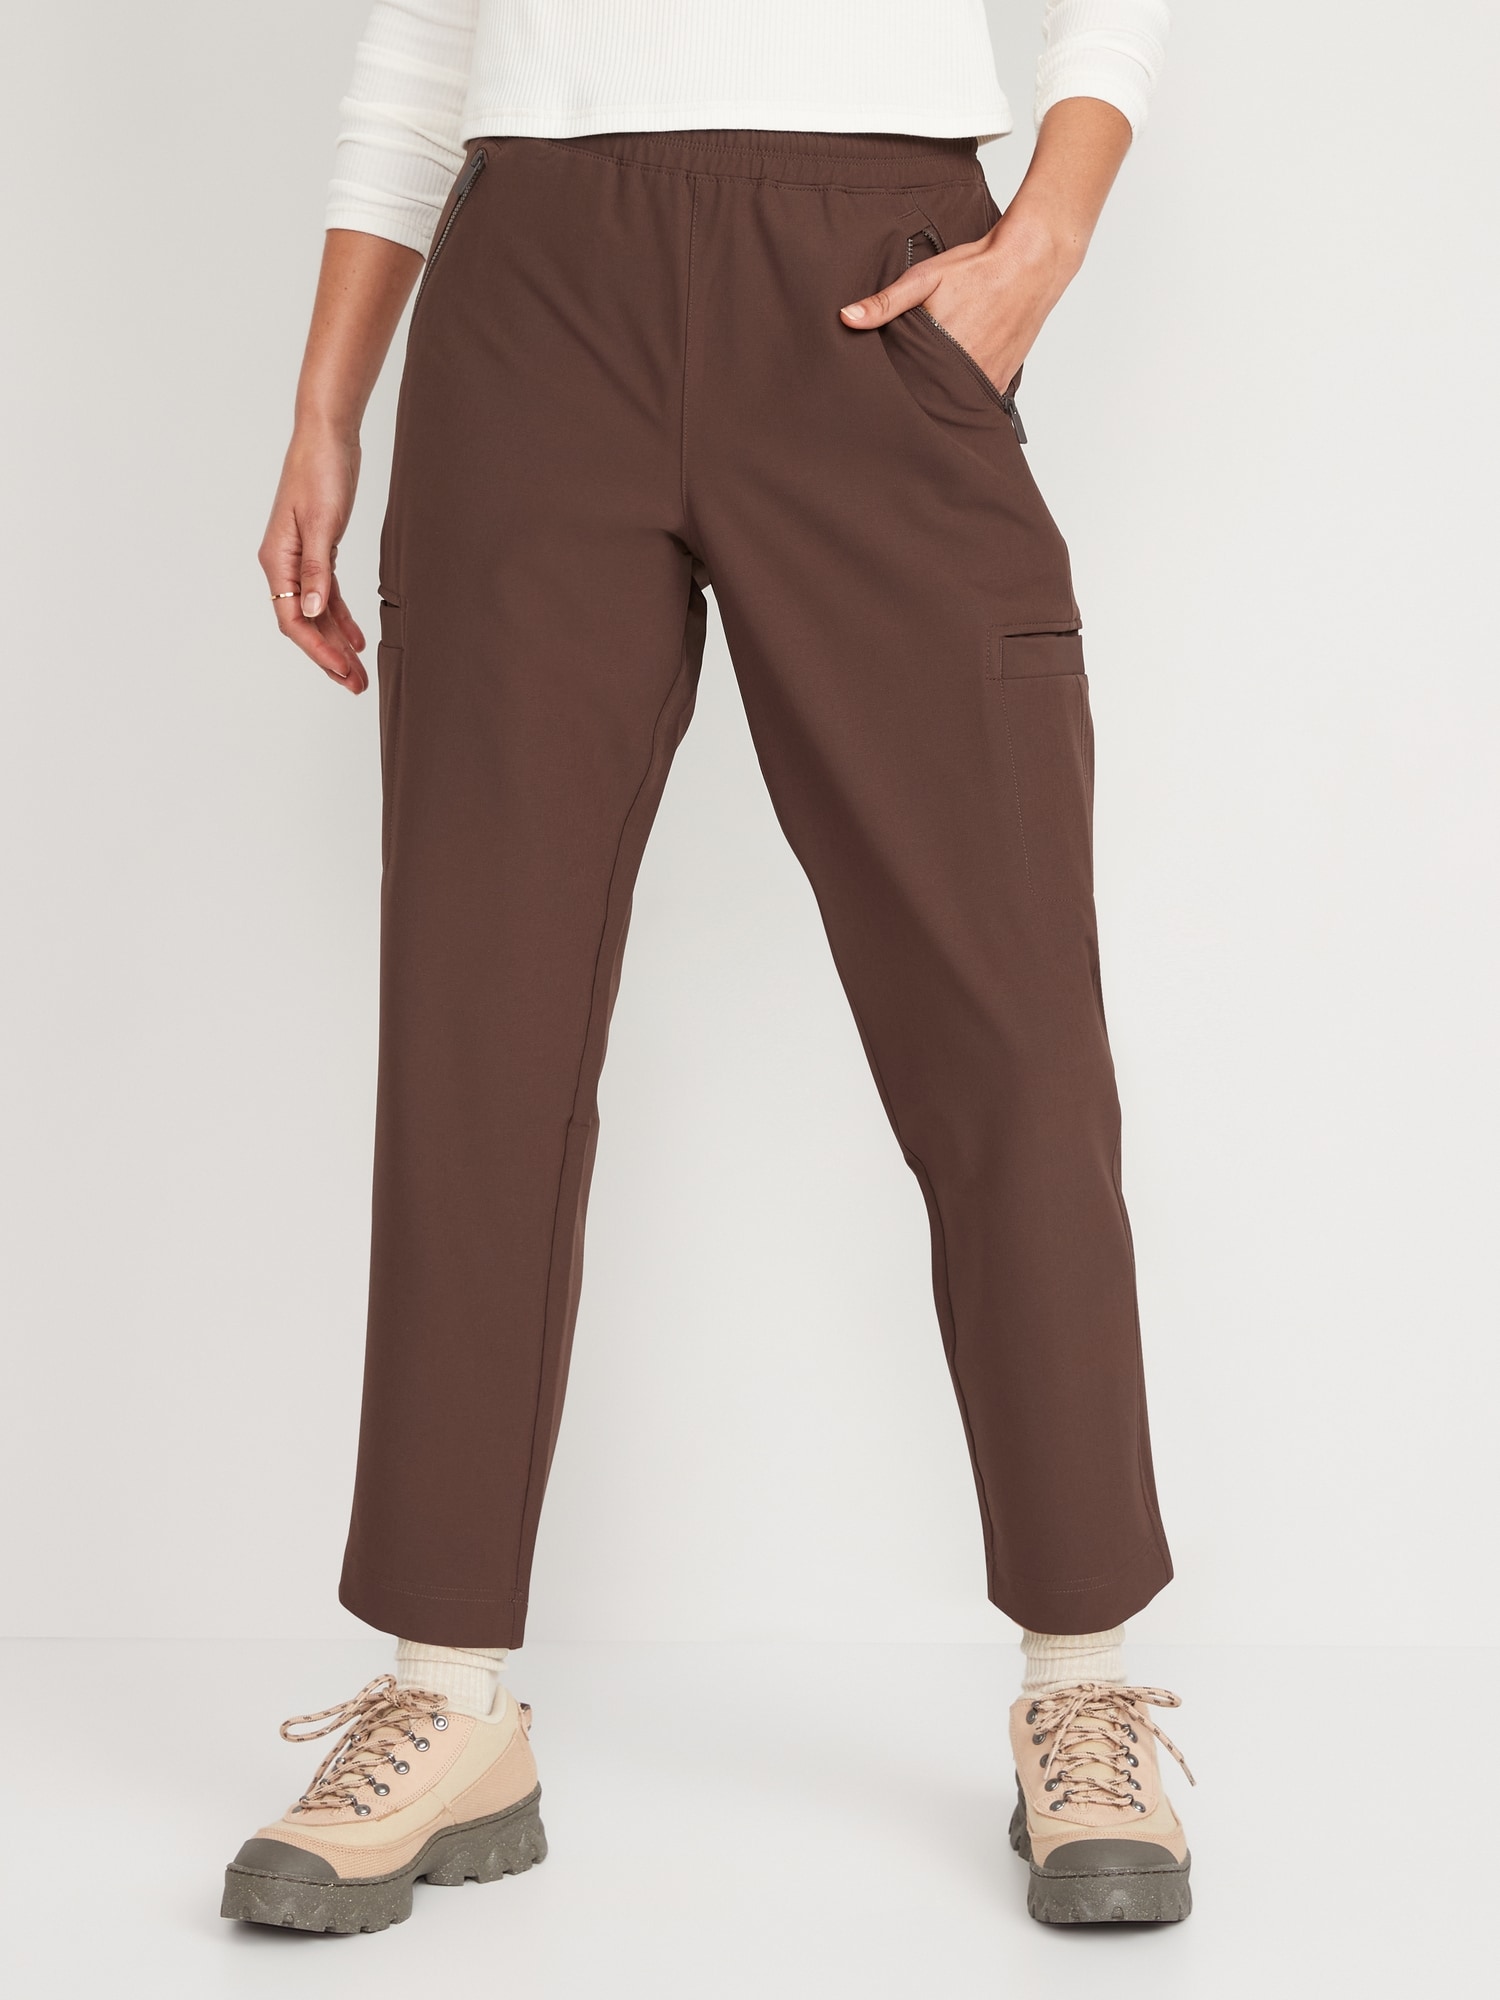 Old Navy High-Waisted All-Seasons StretchTech Slouchy Taper Cargo Pants for Women brown. 1